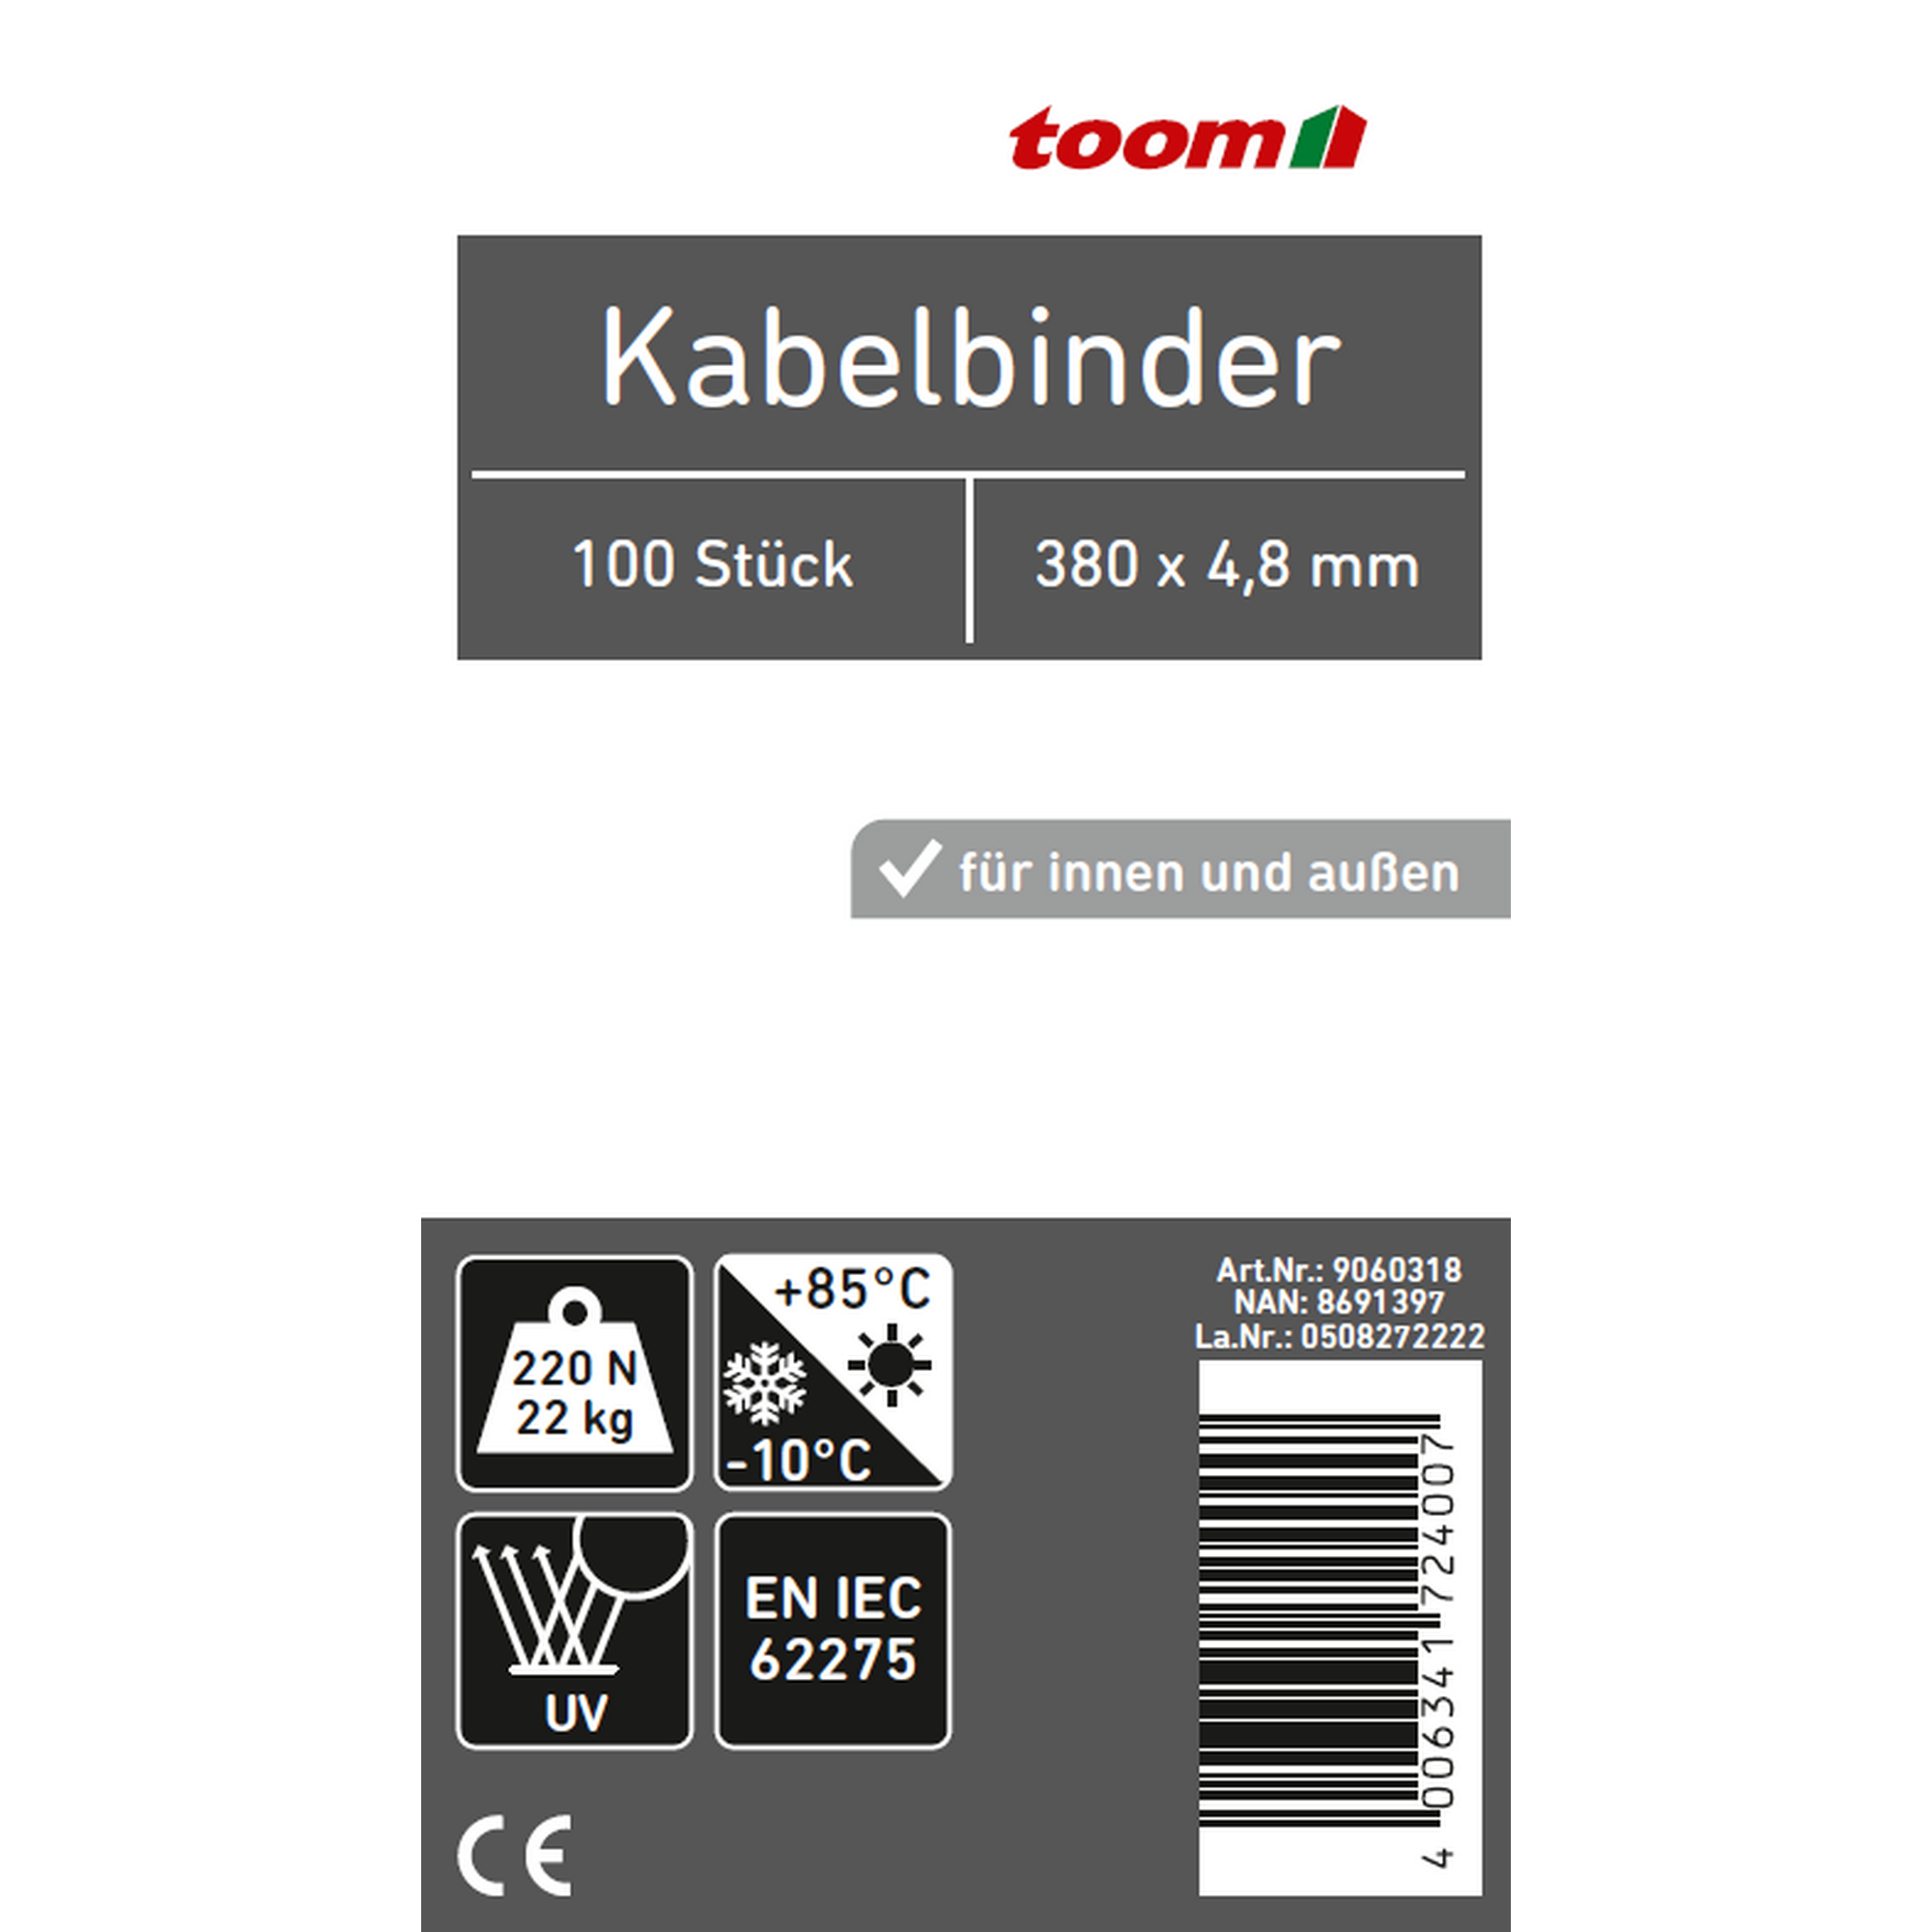 Kabelbinder weiß 4,8 x 380 mm 100 Stück + product picture